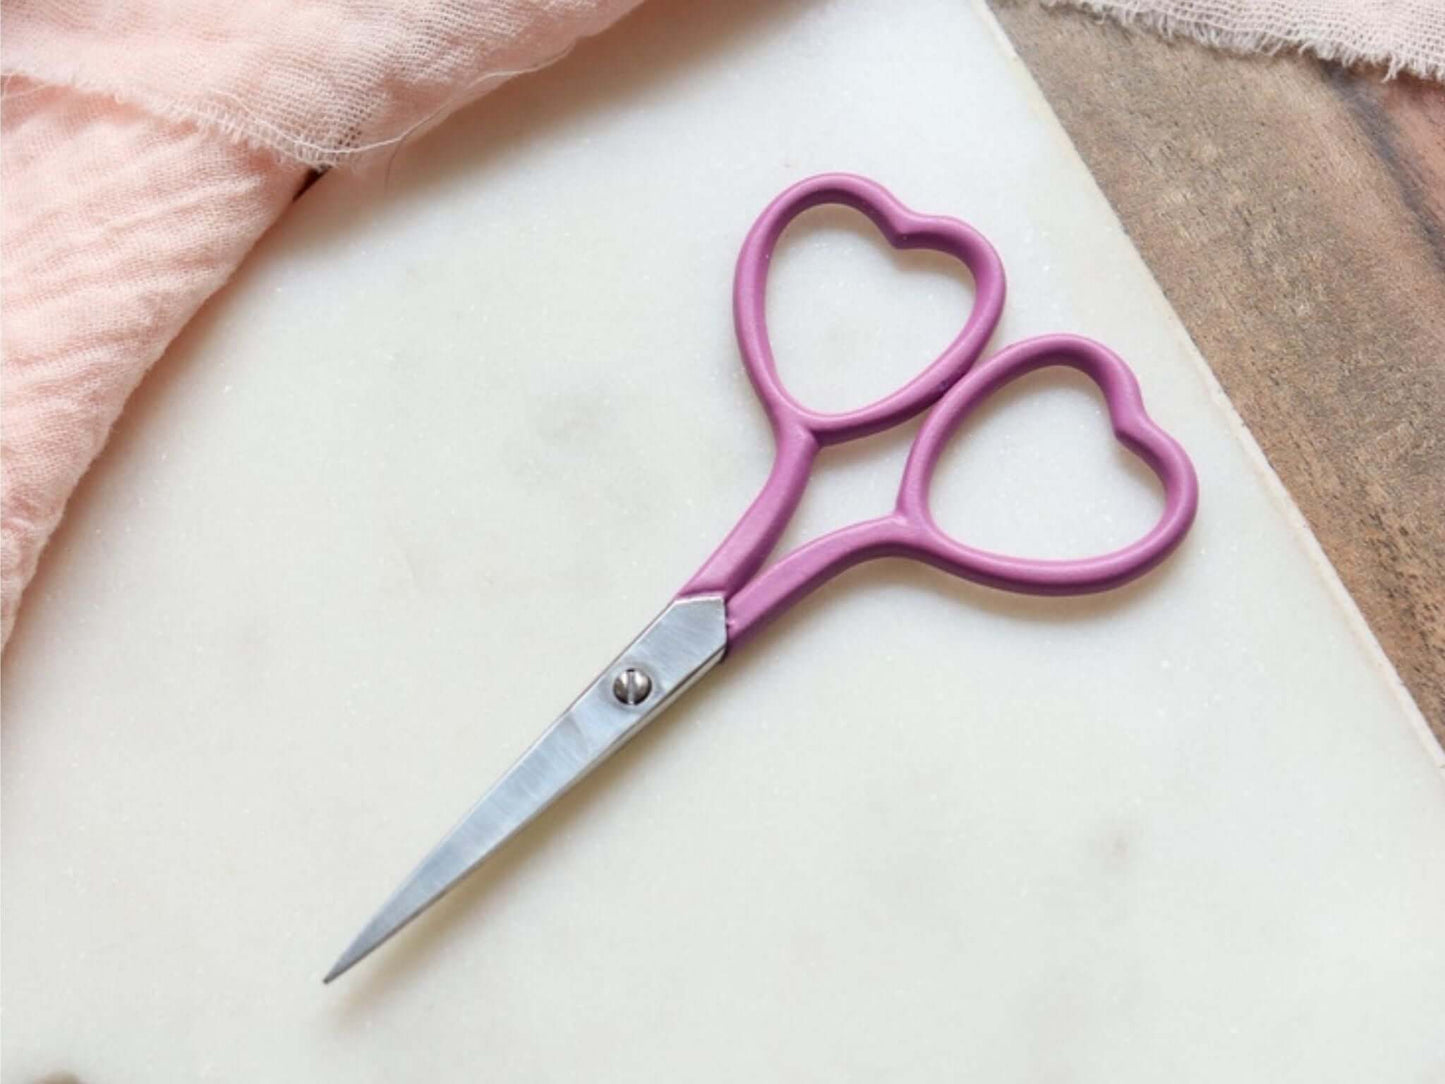 Heart shaped embroidery scissors in magenta pink